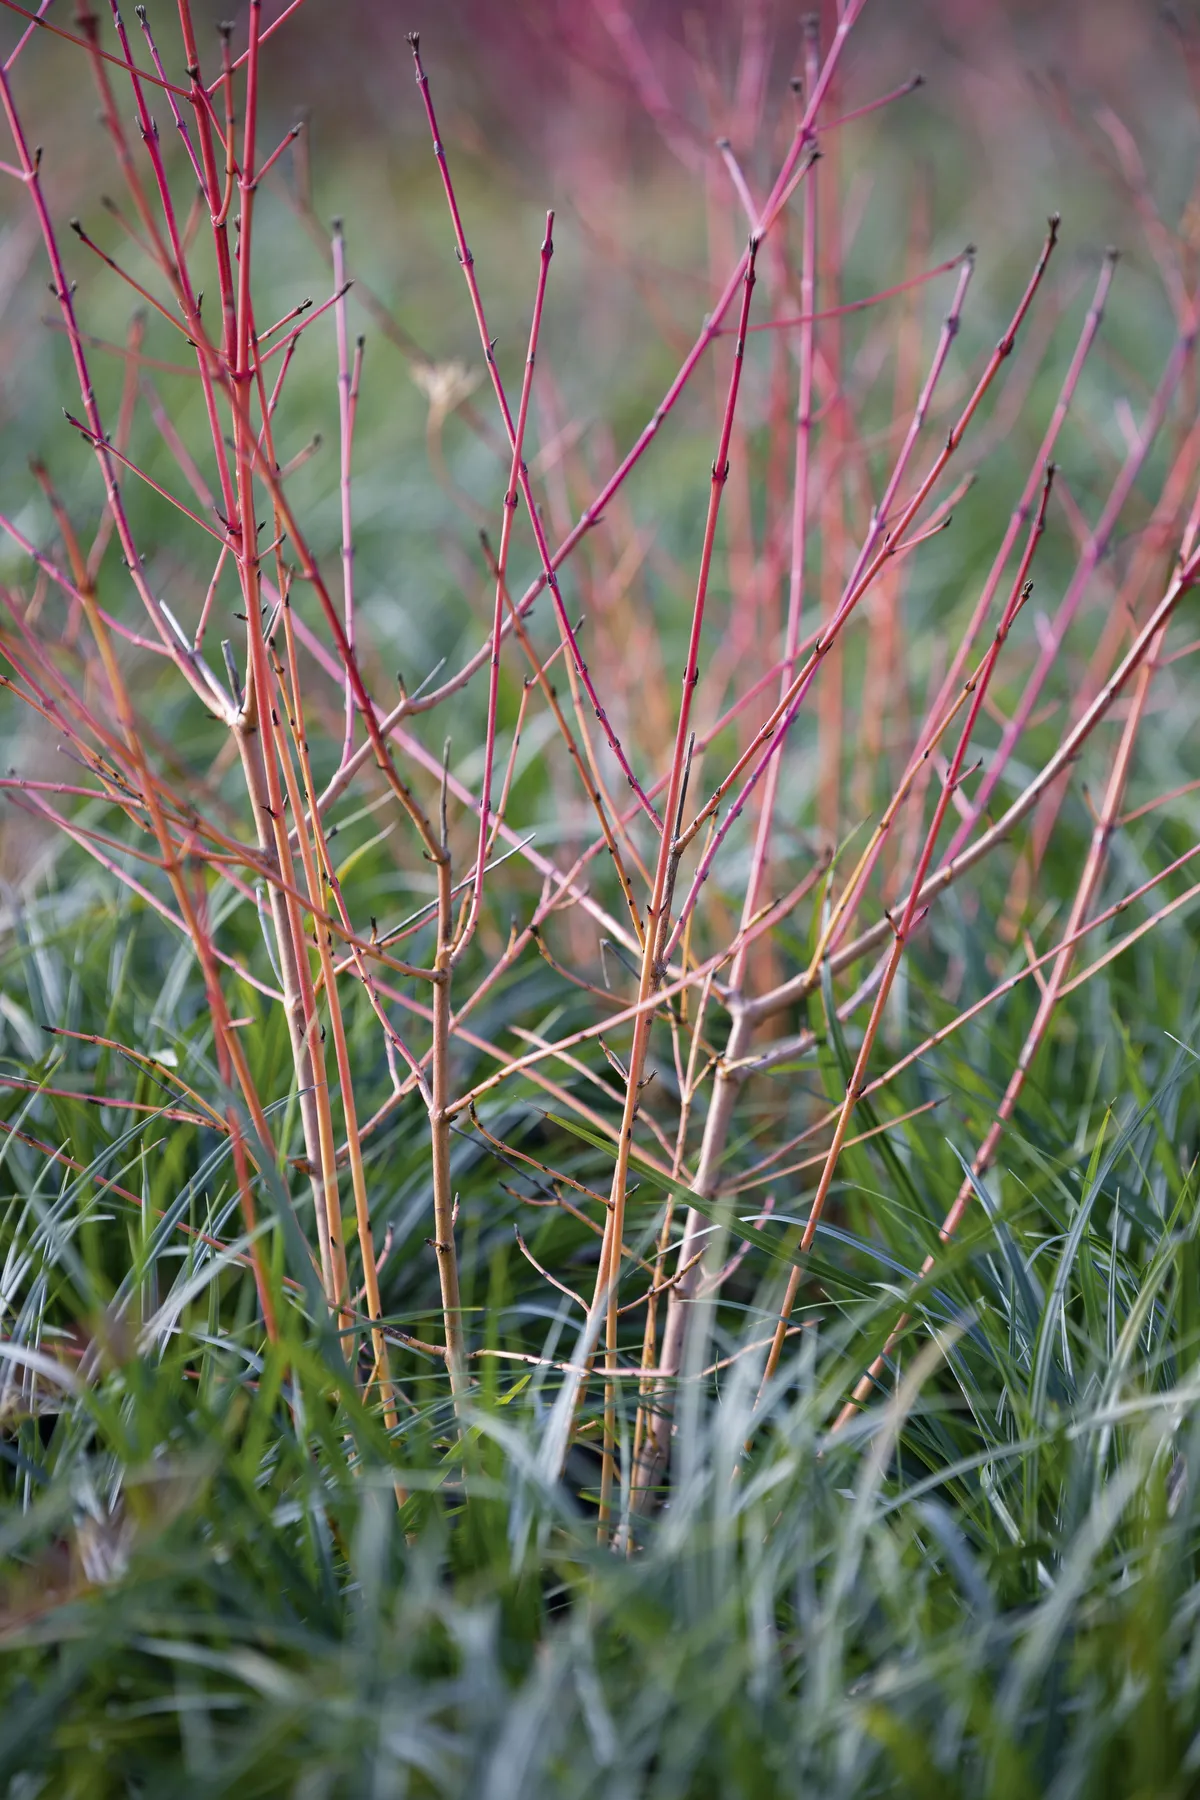 Cornus sanguinea ‘Midwinter Fire’ 7 Cornus sanguinea ‘Anny’s Winter Orange’ A spreading shrub with buttery-yellow autumn foliage that falls to reveal yellow stems. An upright shrub with buttery-yellow autumn foliage that falls to reveal yellow stems, which These change to orange and then red at the tips. 2m x 1.5m. RHS H6, USDA 5a-7b.